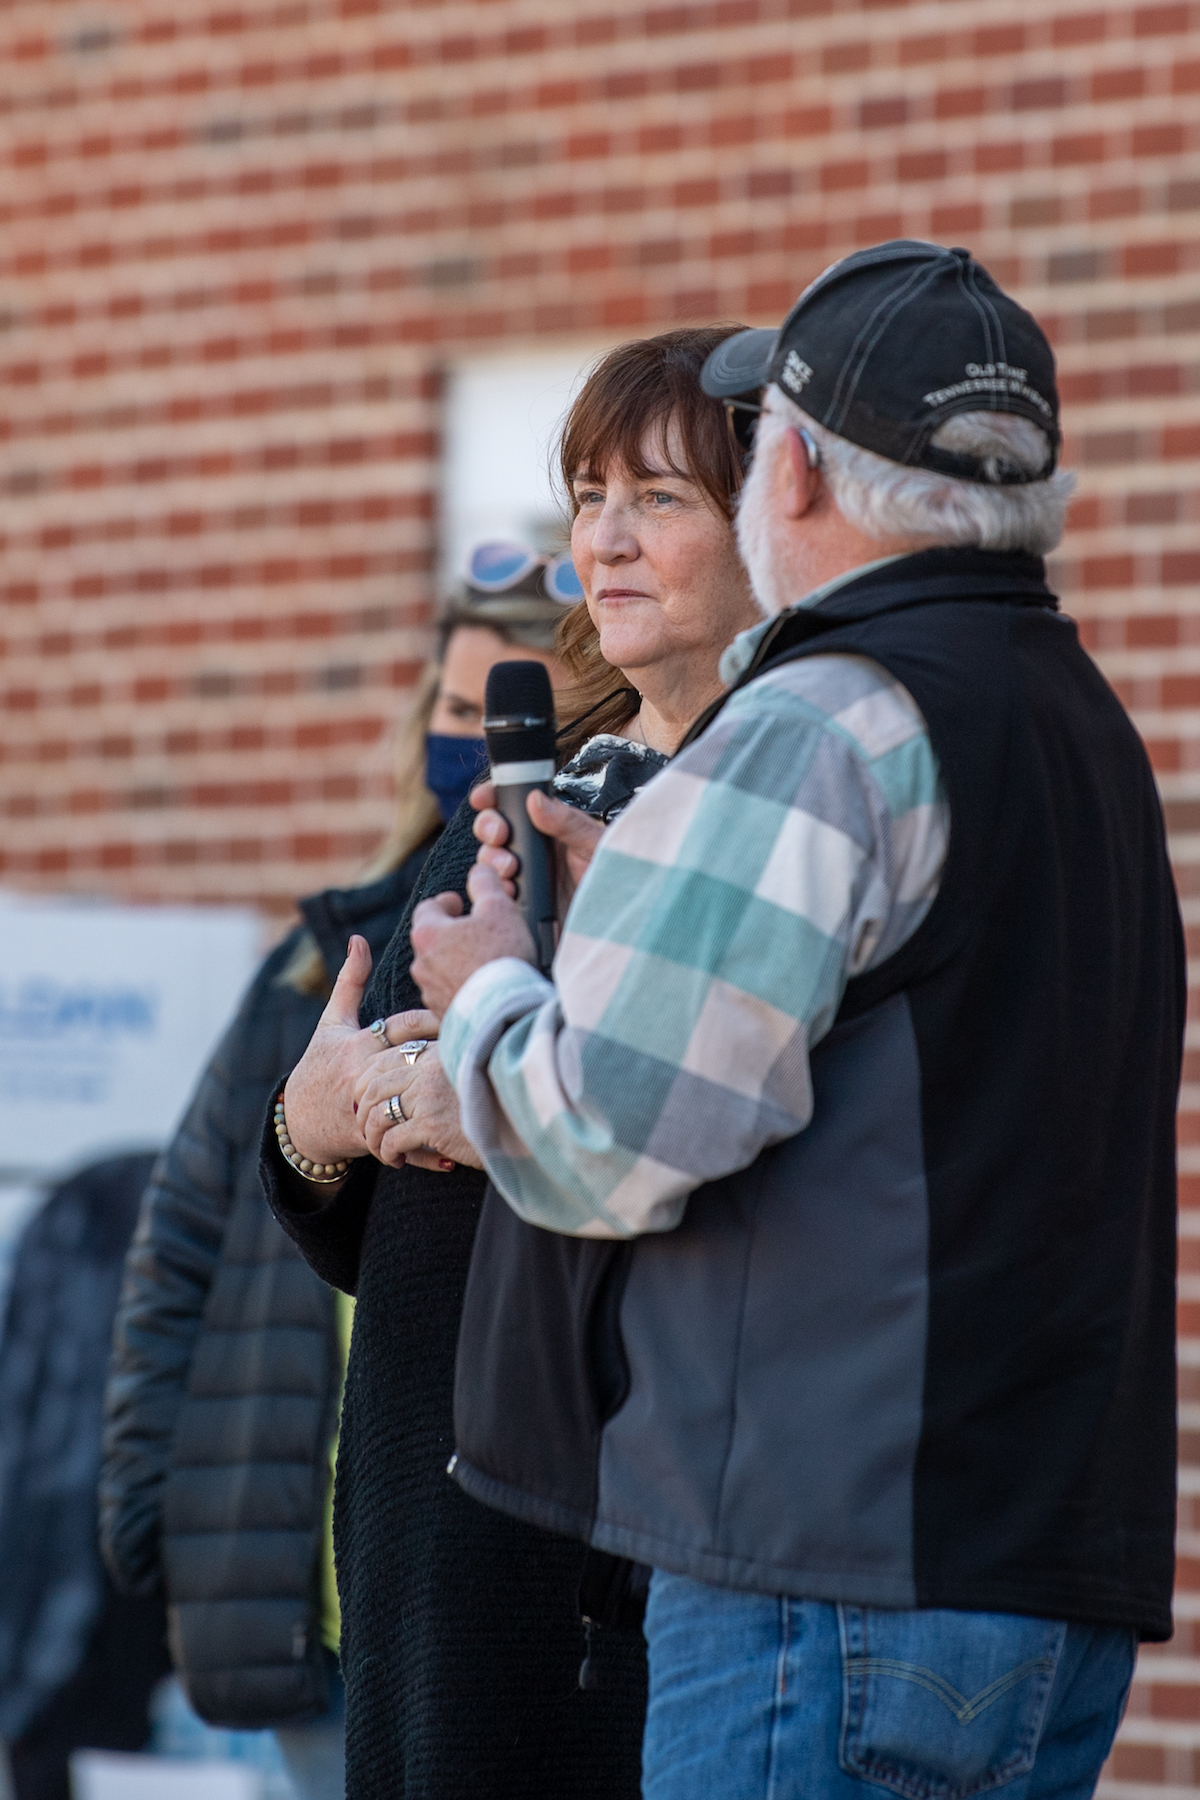 A ceremony was held Wednesday morning on Centennial Plaza where students, faculty and staff gathered to listen to various speakers recant that fateful day, give thanks and discuss the reaction and response campus had to the tornado.